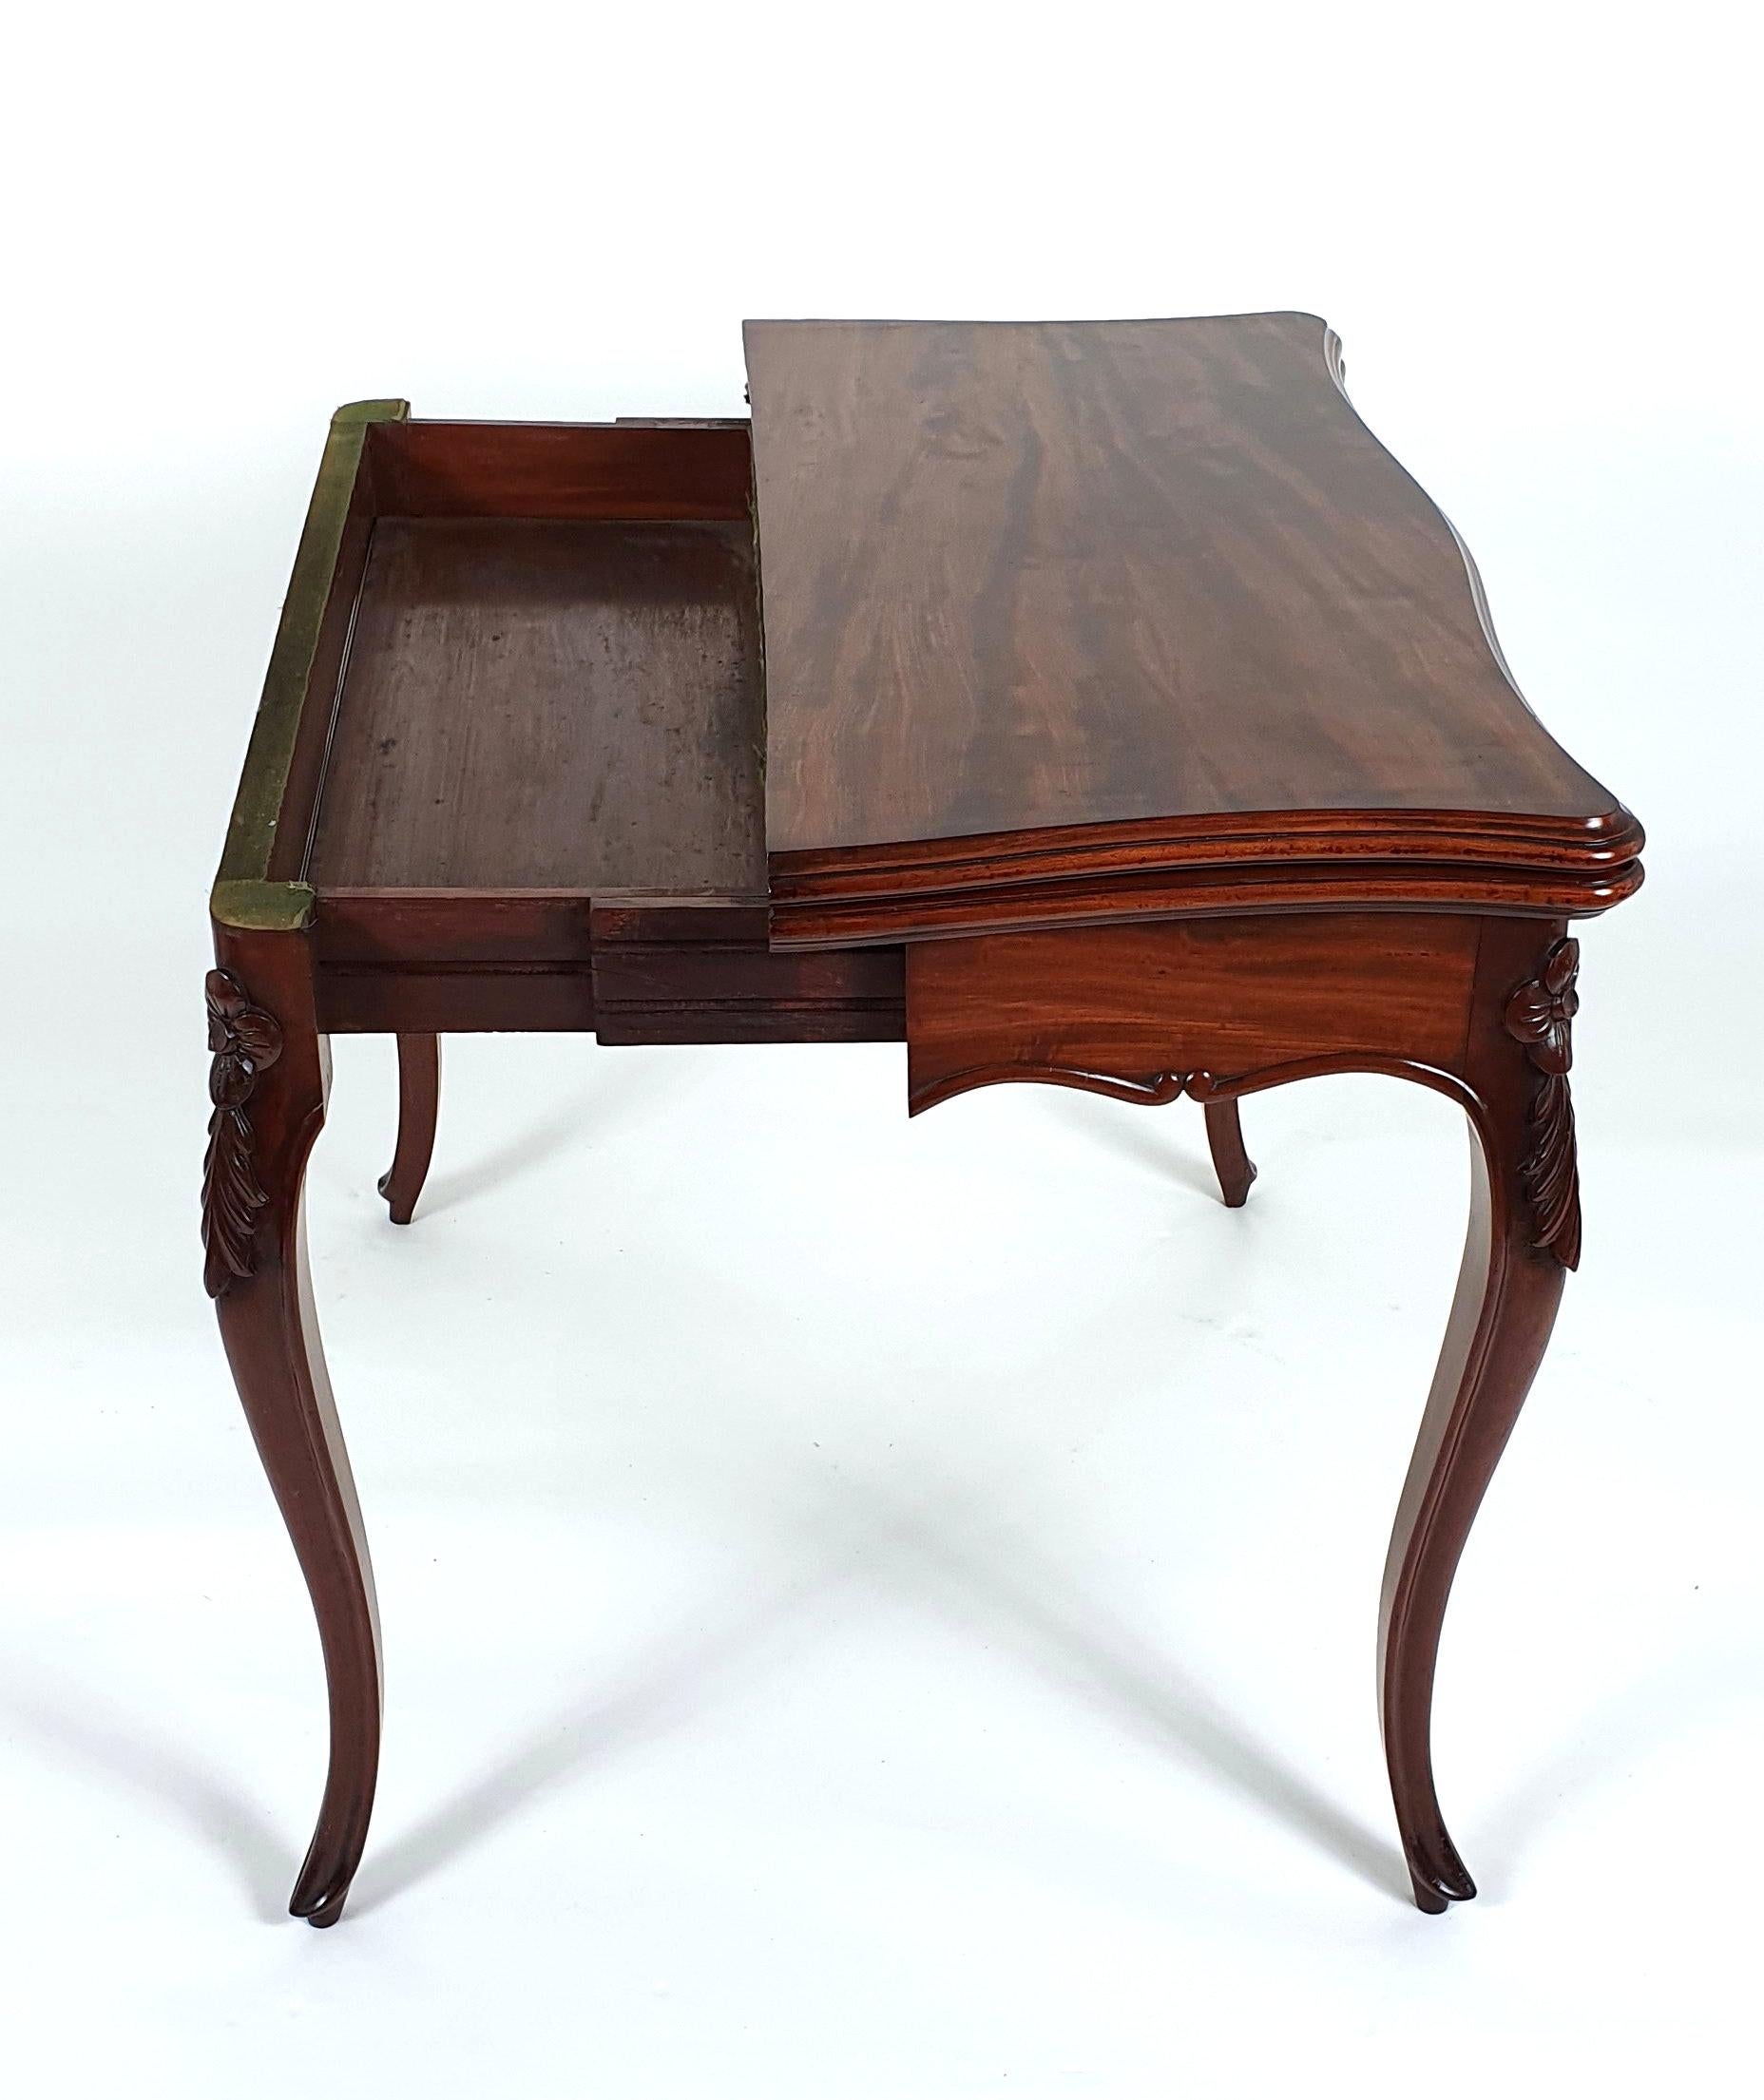 19th Century French Figured Mahogany Fold-Over Card Table For Sale 6